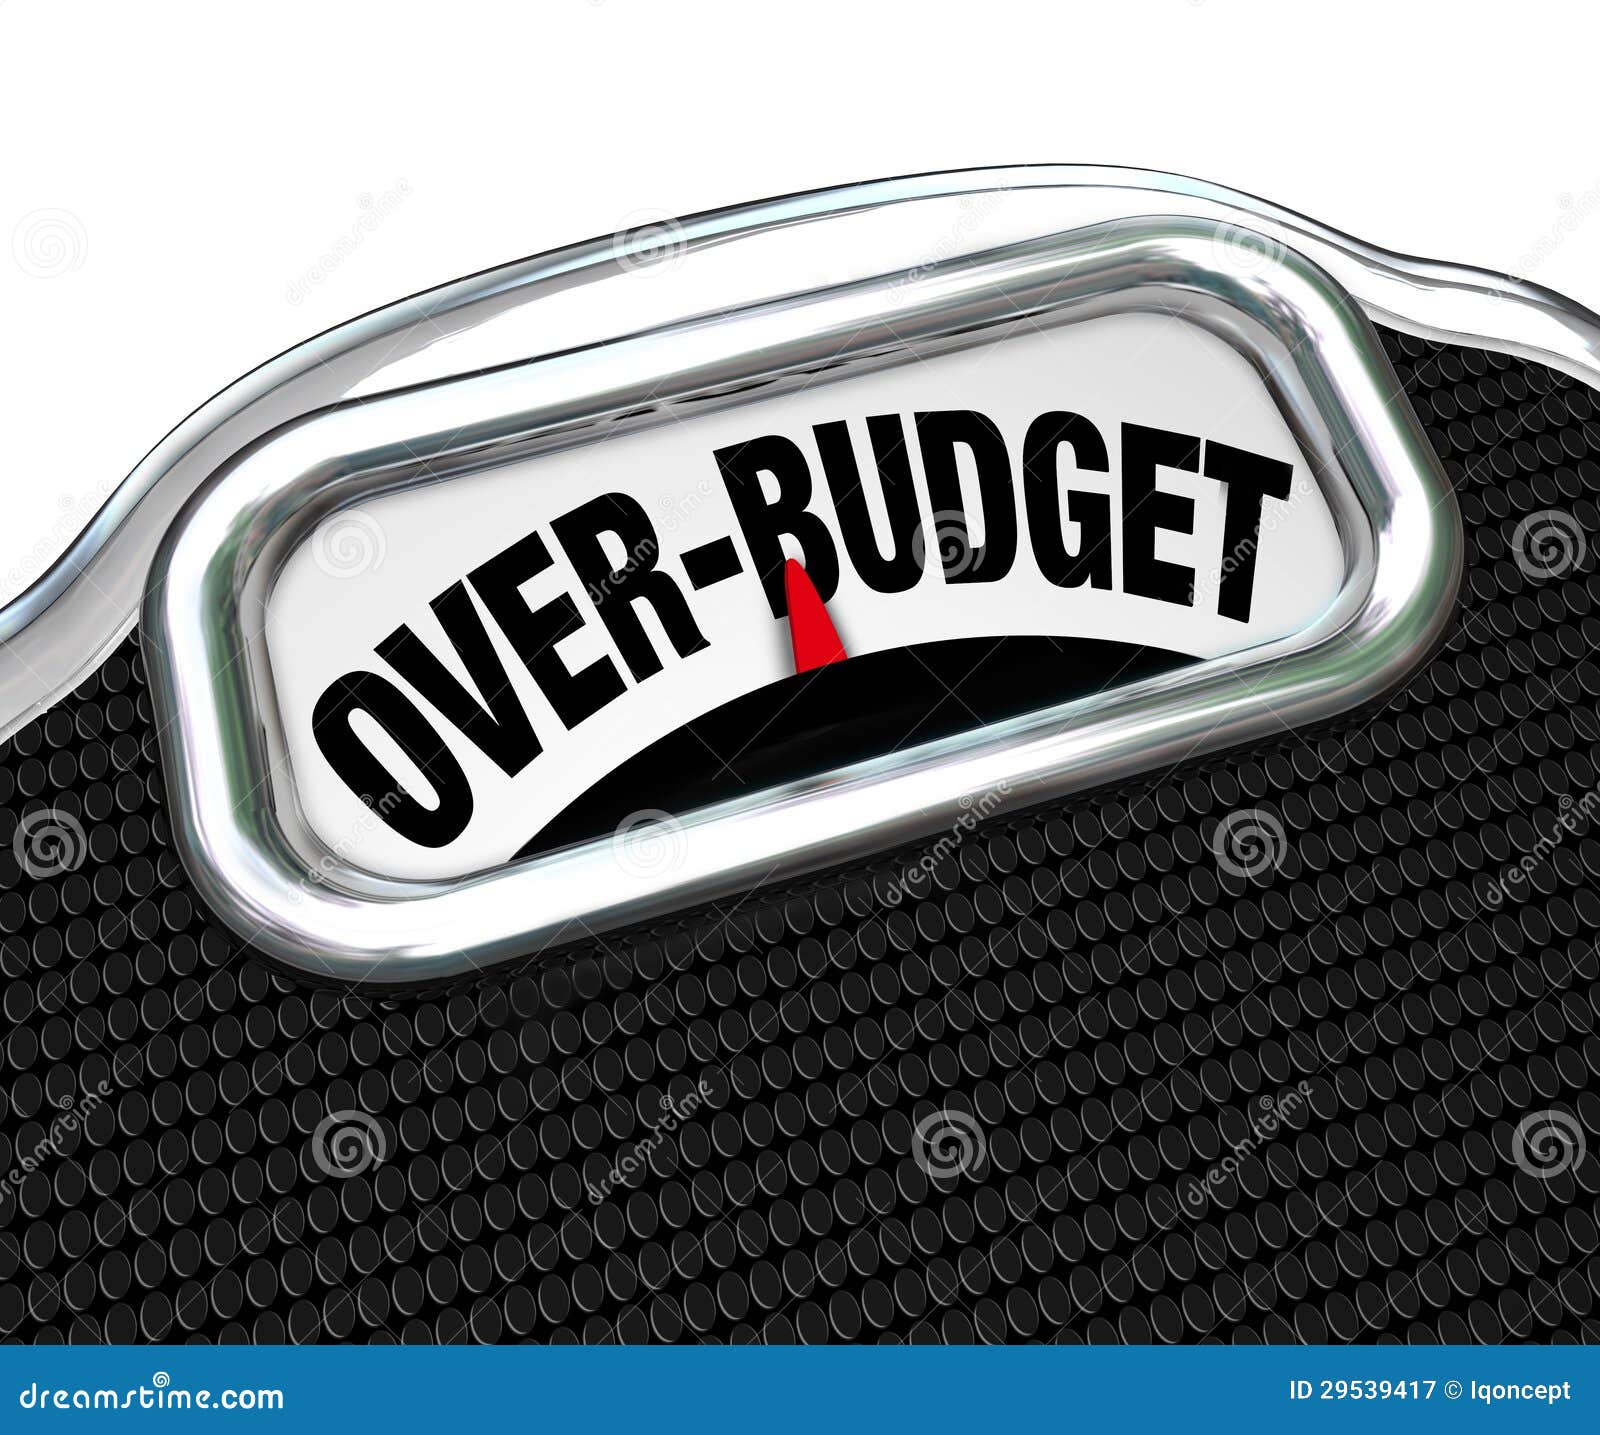 over-budget words on scale financial trouble debt deficit